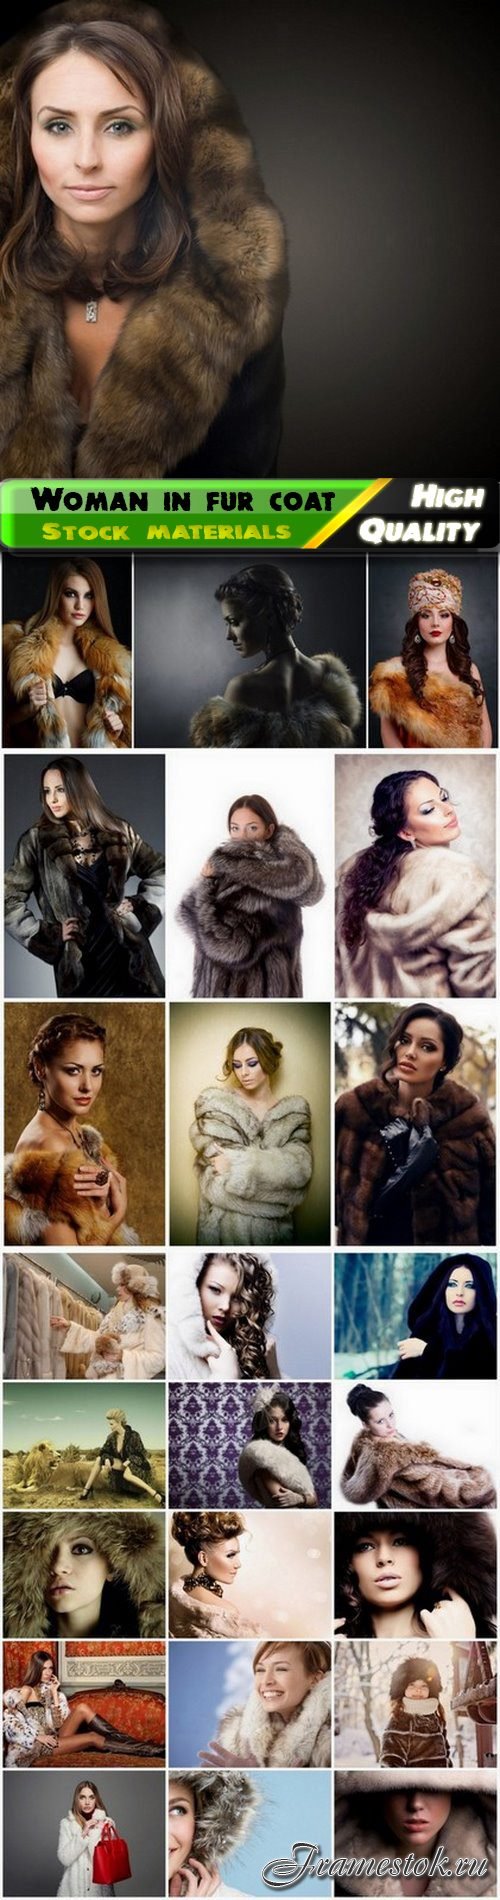 Fashionable woman and girl dressed in fur coat - 25 Eps